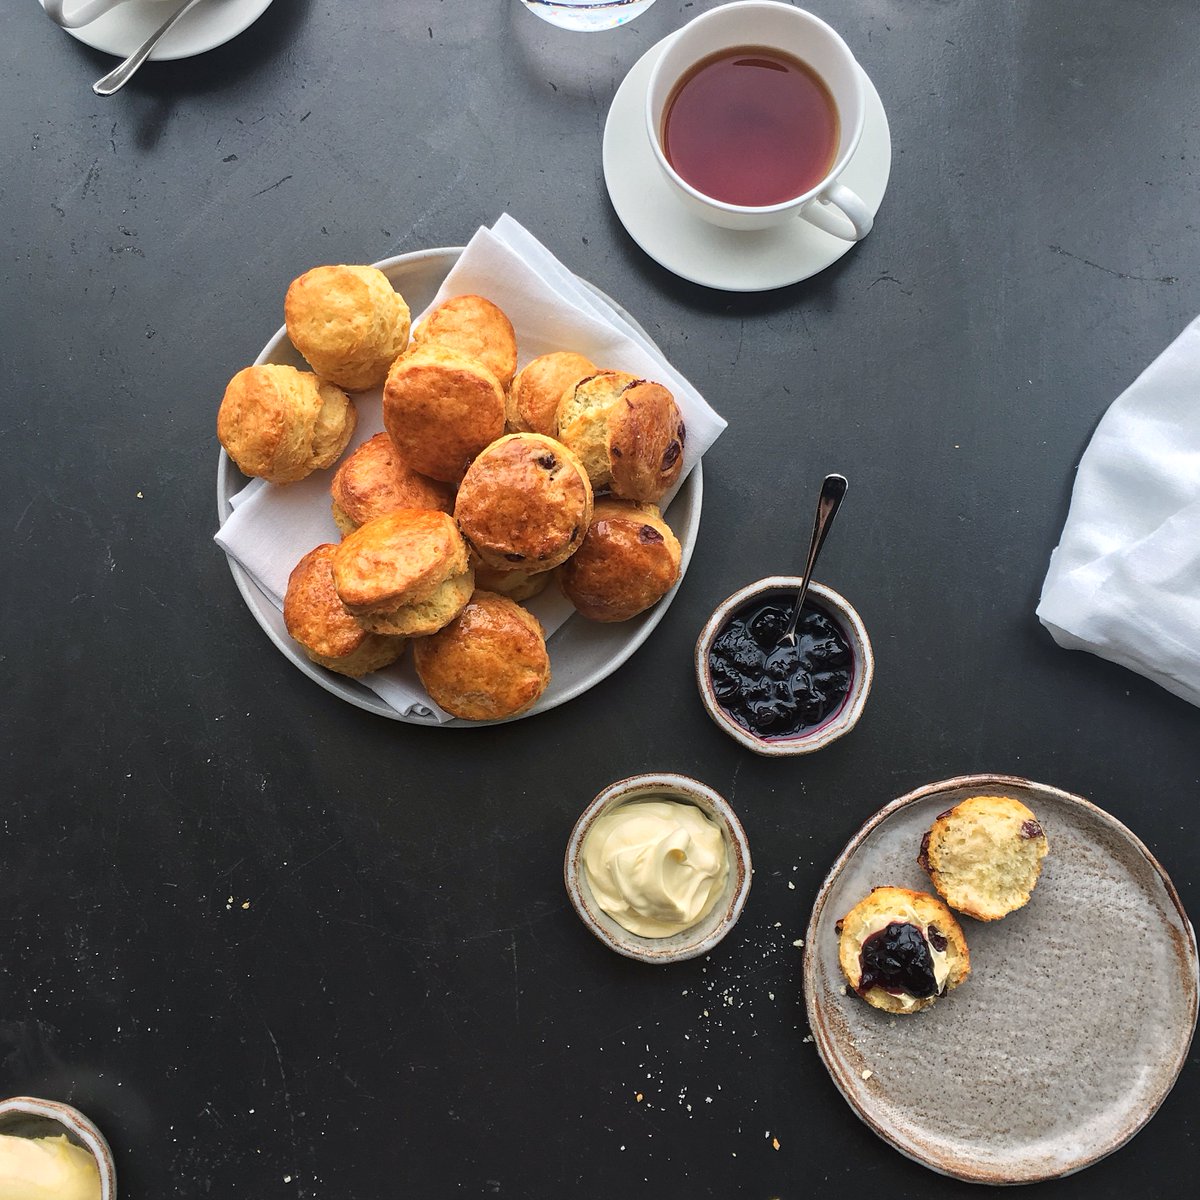 Happy #AfternoonTeaMonth everyone! Be quick, before it's scone!